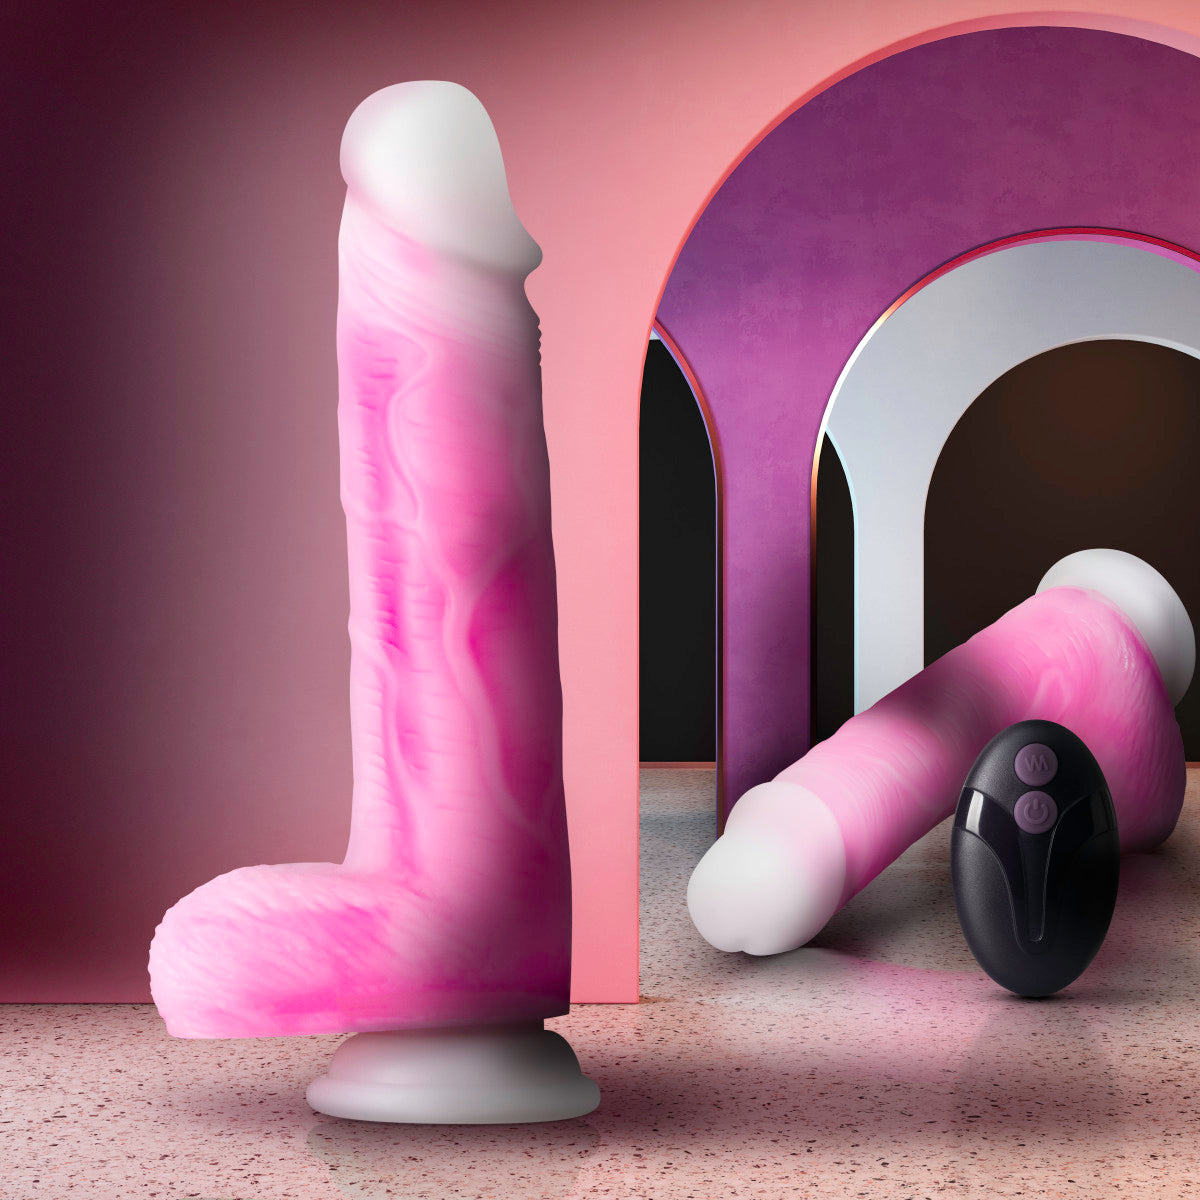 Neo Elite™ | Roxy Pink: 8.5-Inch Long Vibrating Dildo - Made with Purio™ Silicone & SensaFeel® Dual Density Realistic Technology